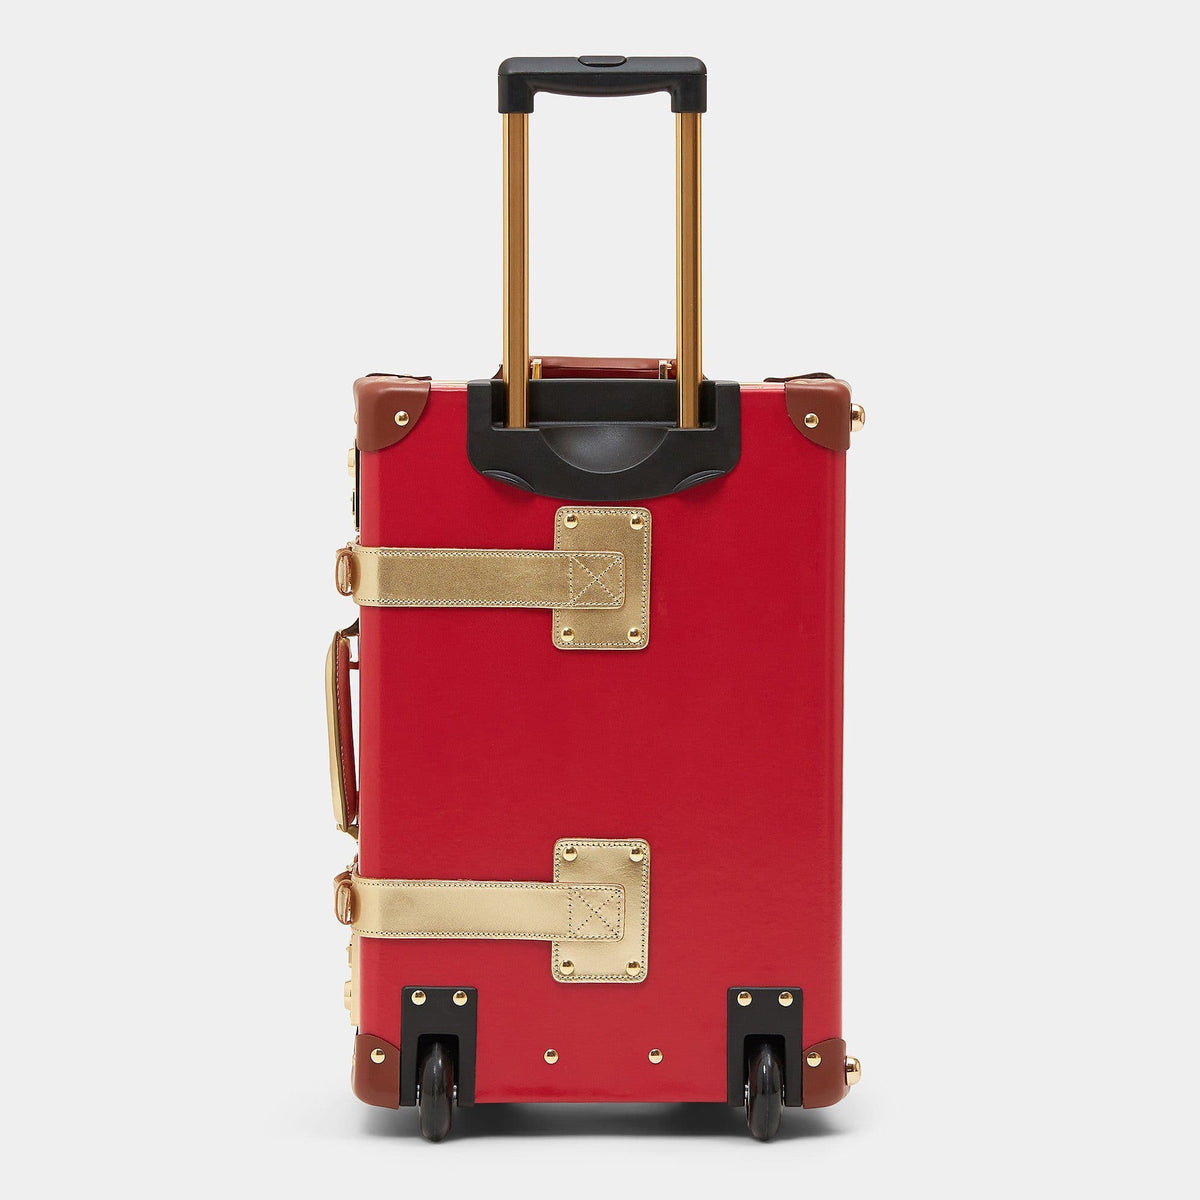 The Soprano - Red Carryon Carryon Steamline Luggage 